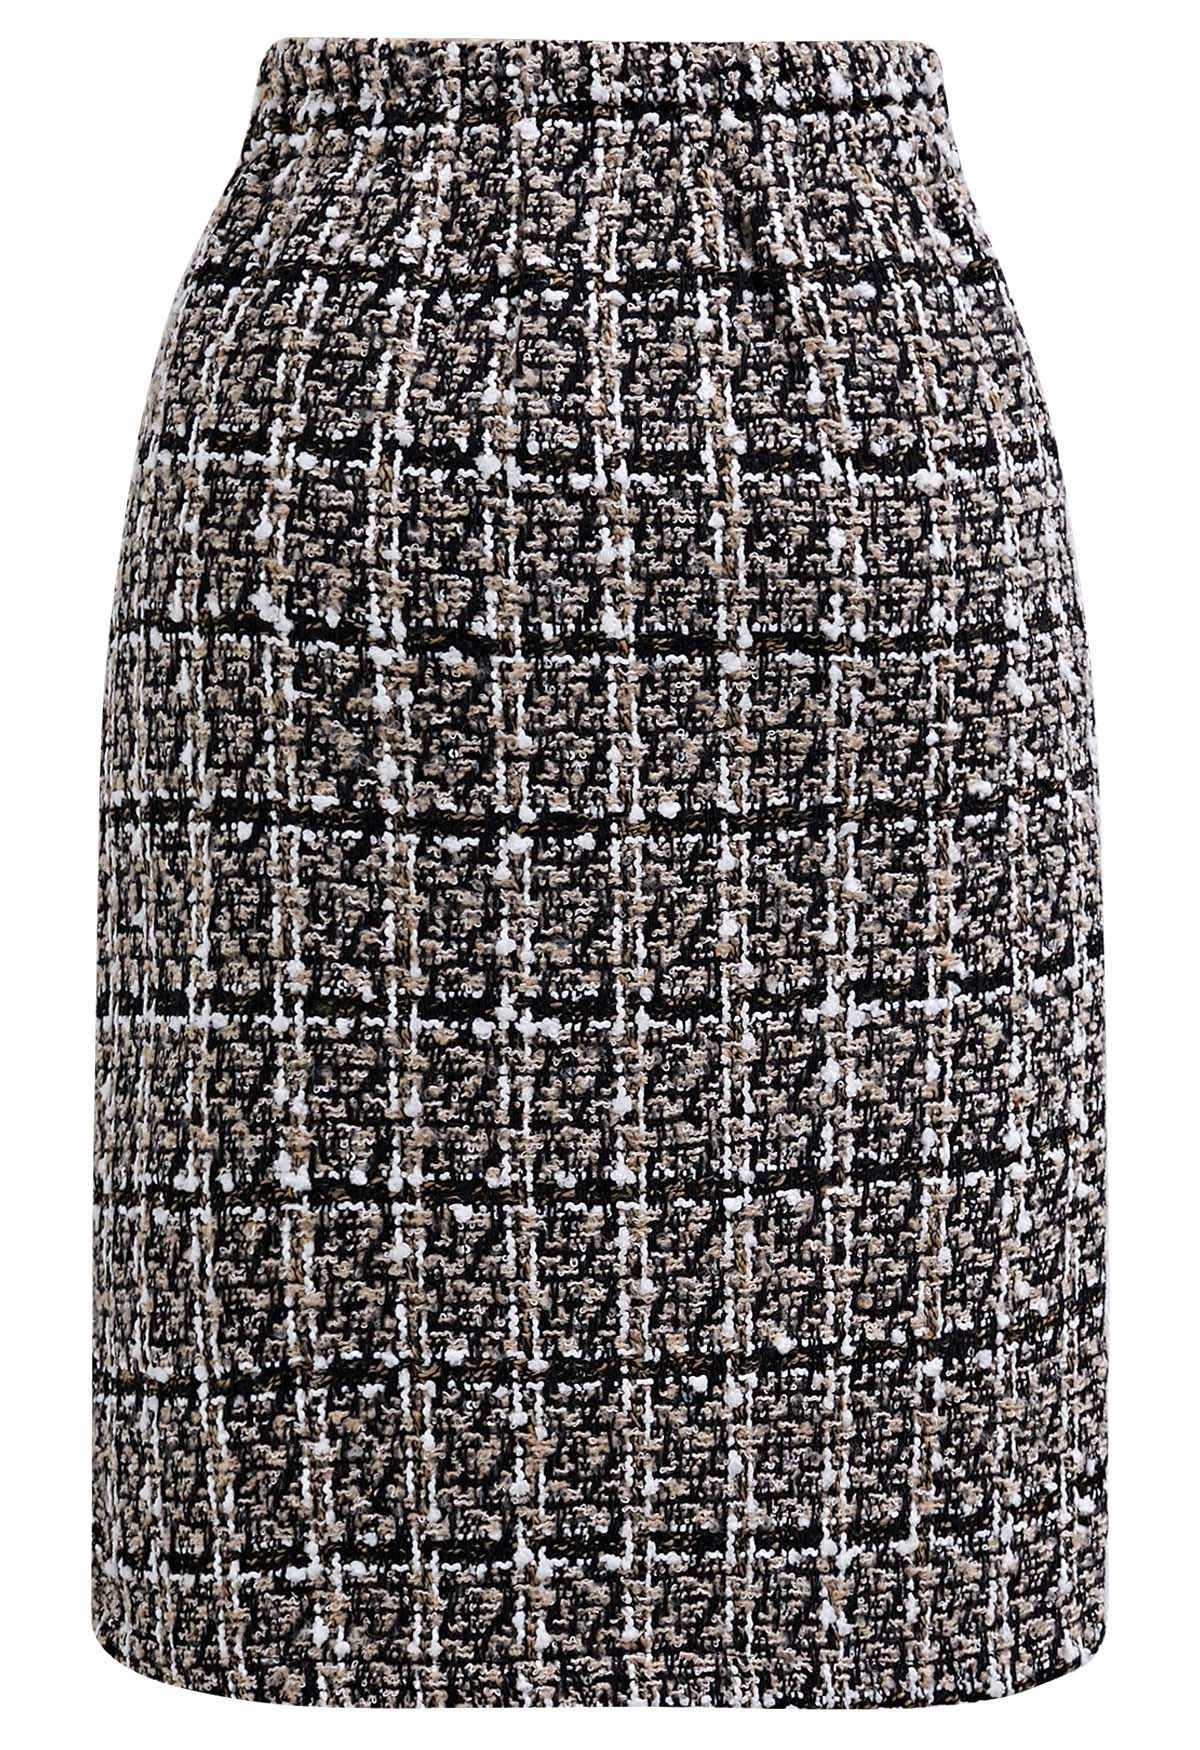 Patch Pocket Buttoned Check Tweed Skirt in Light Tan